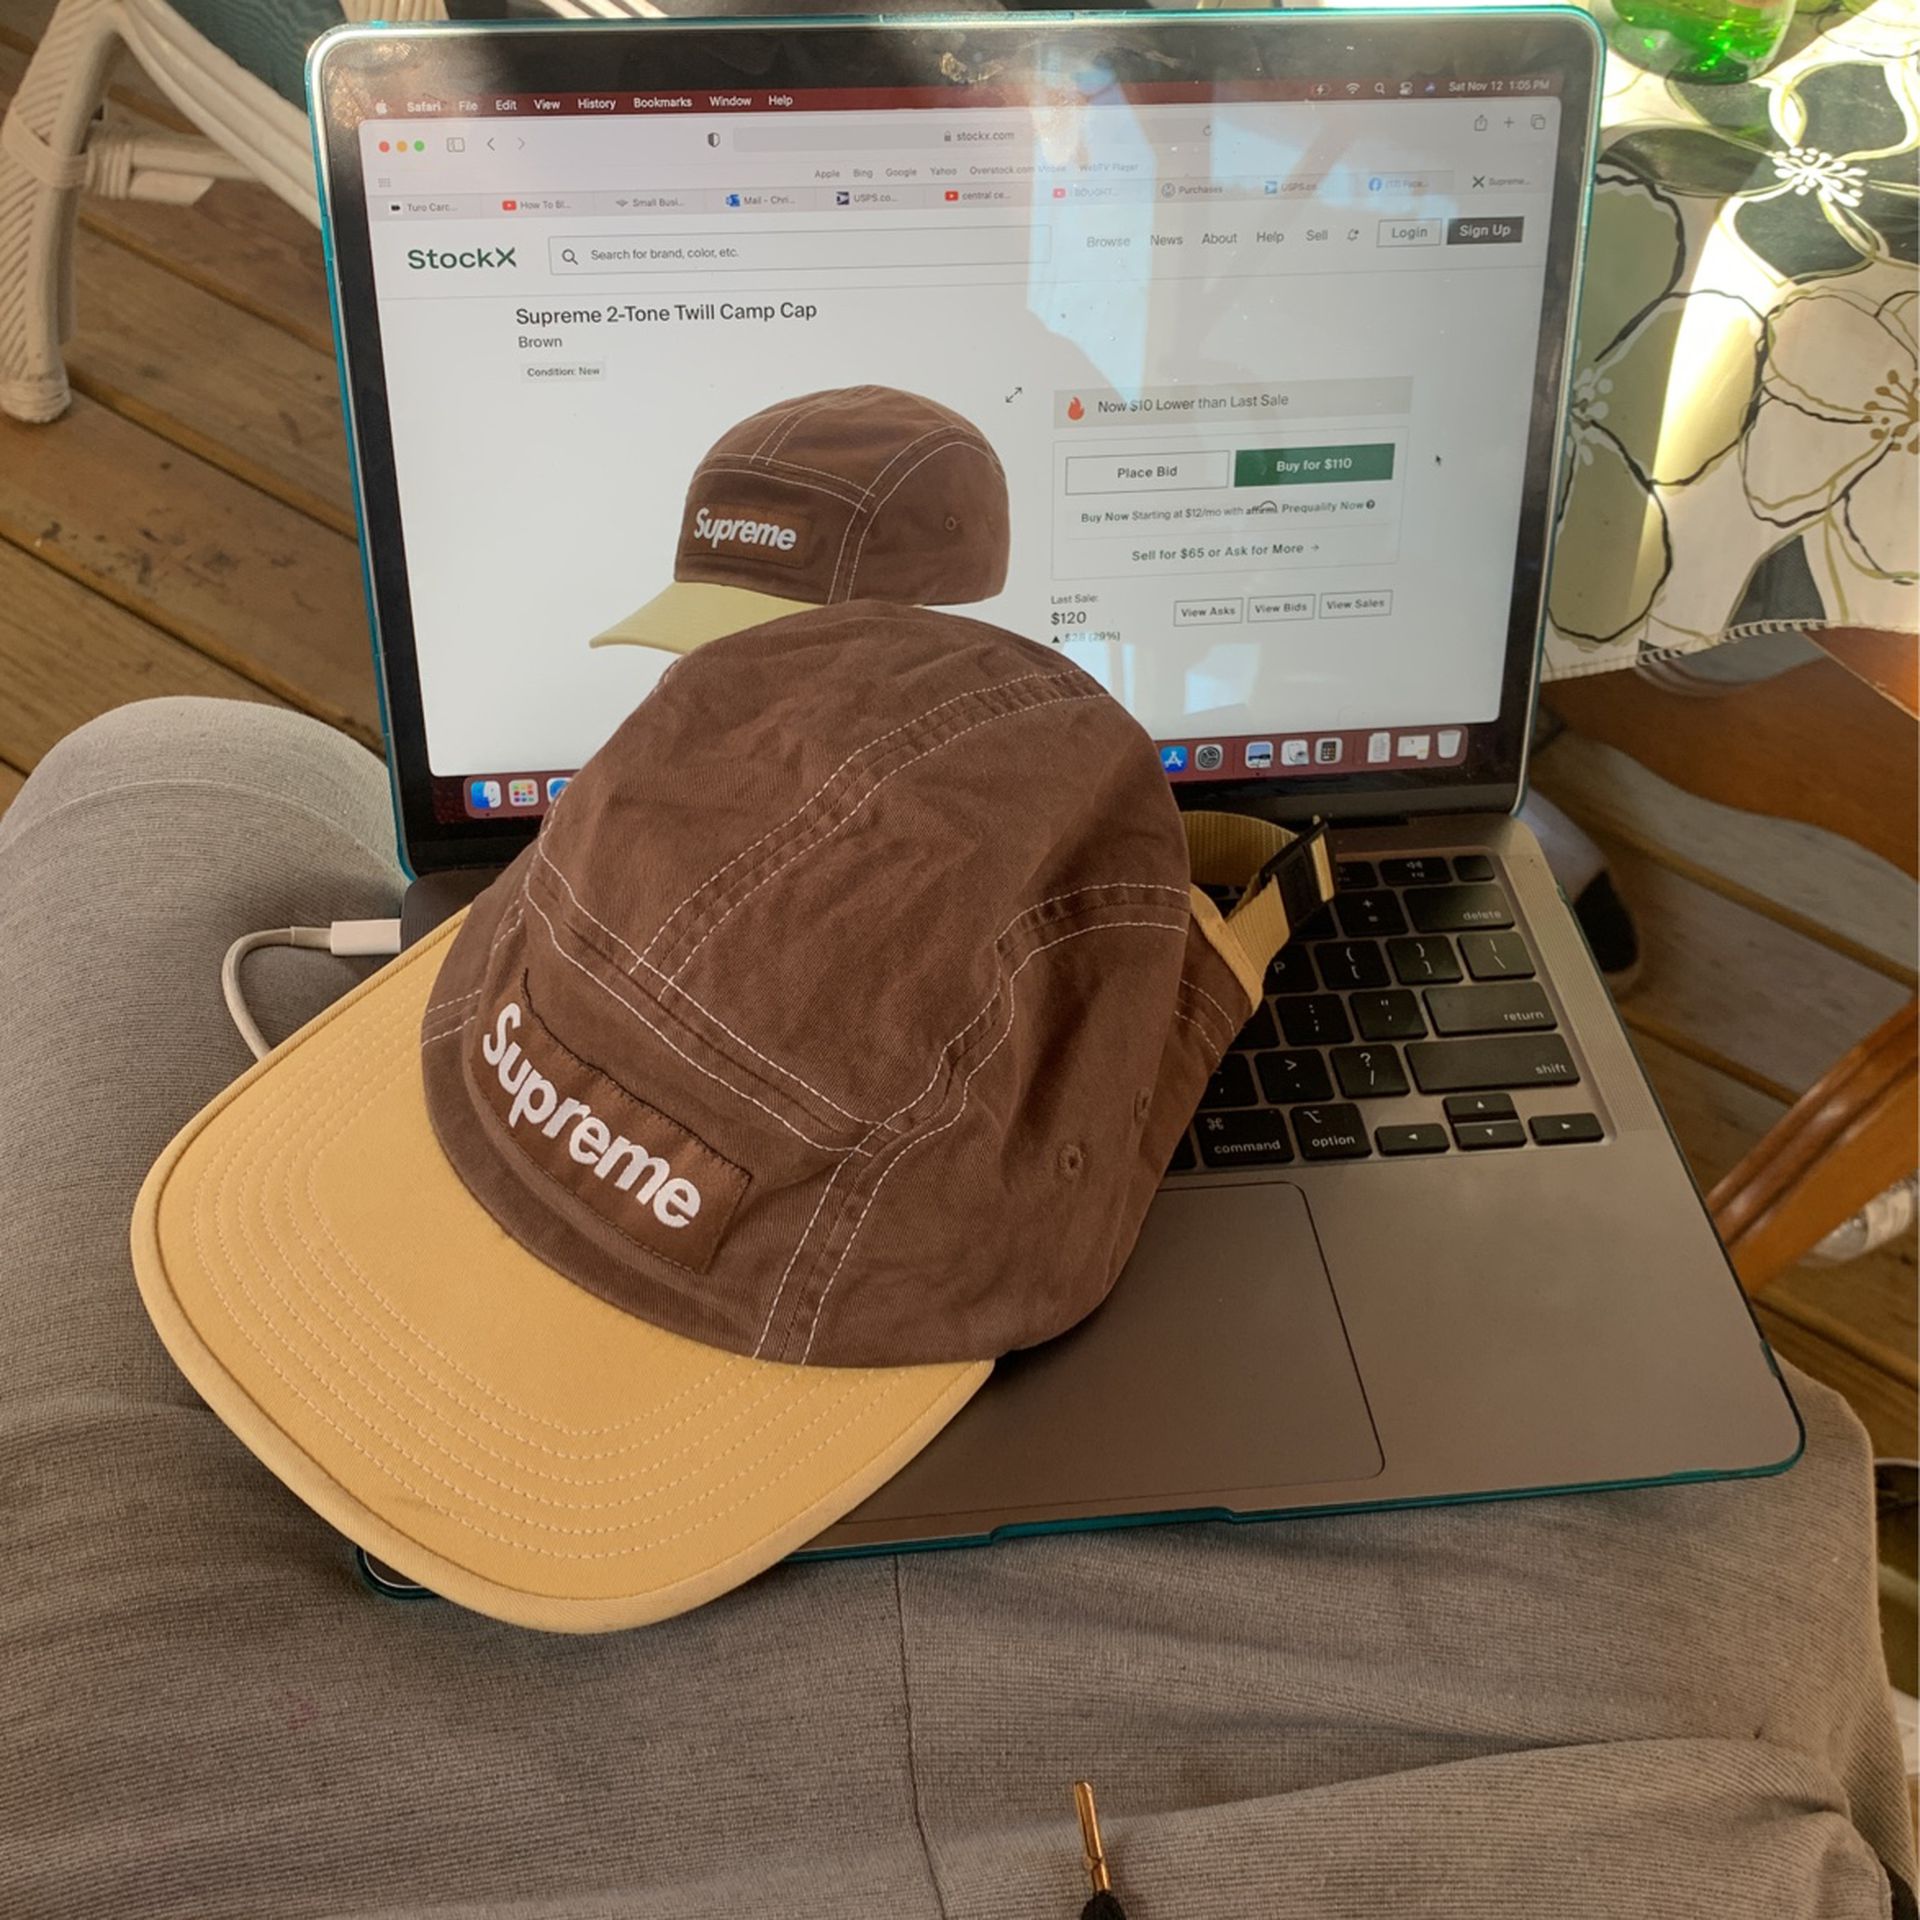 Supreme 2-Tone Twill Camp Cap for Sale in Floral Park, NY - OfferUp